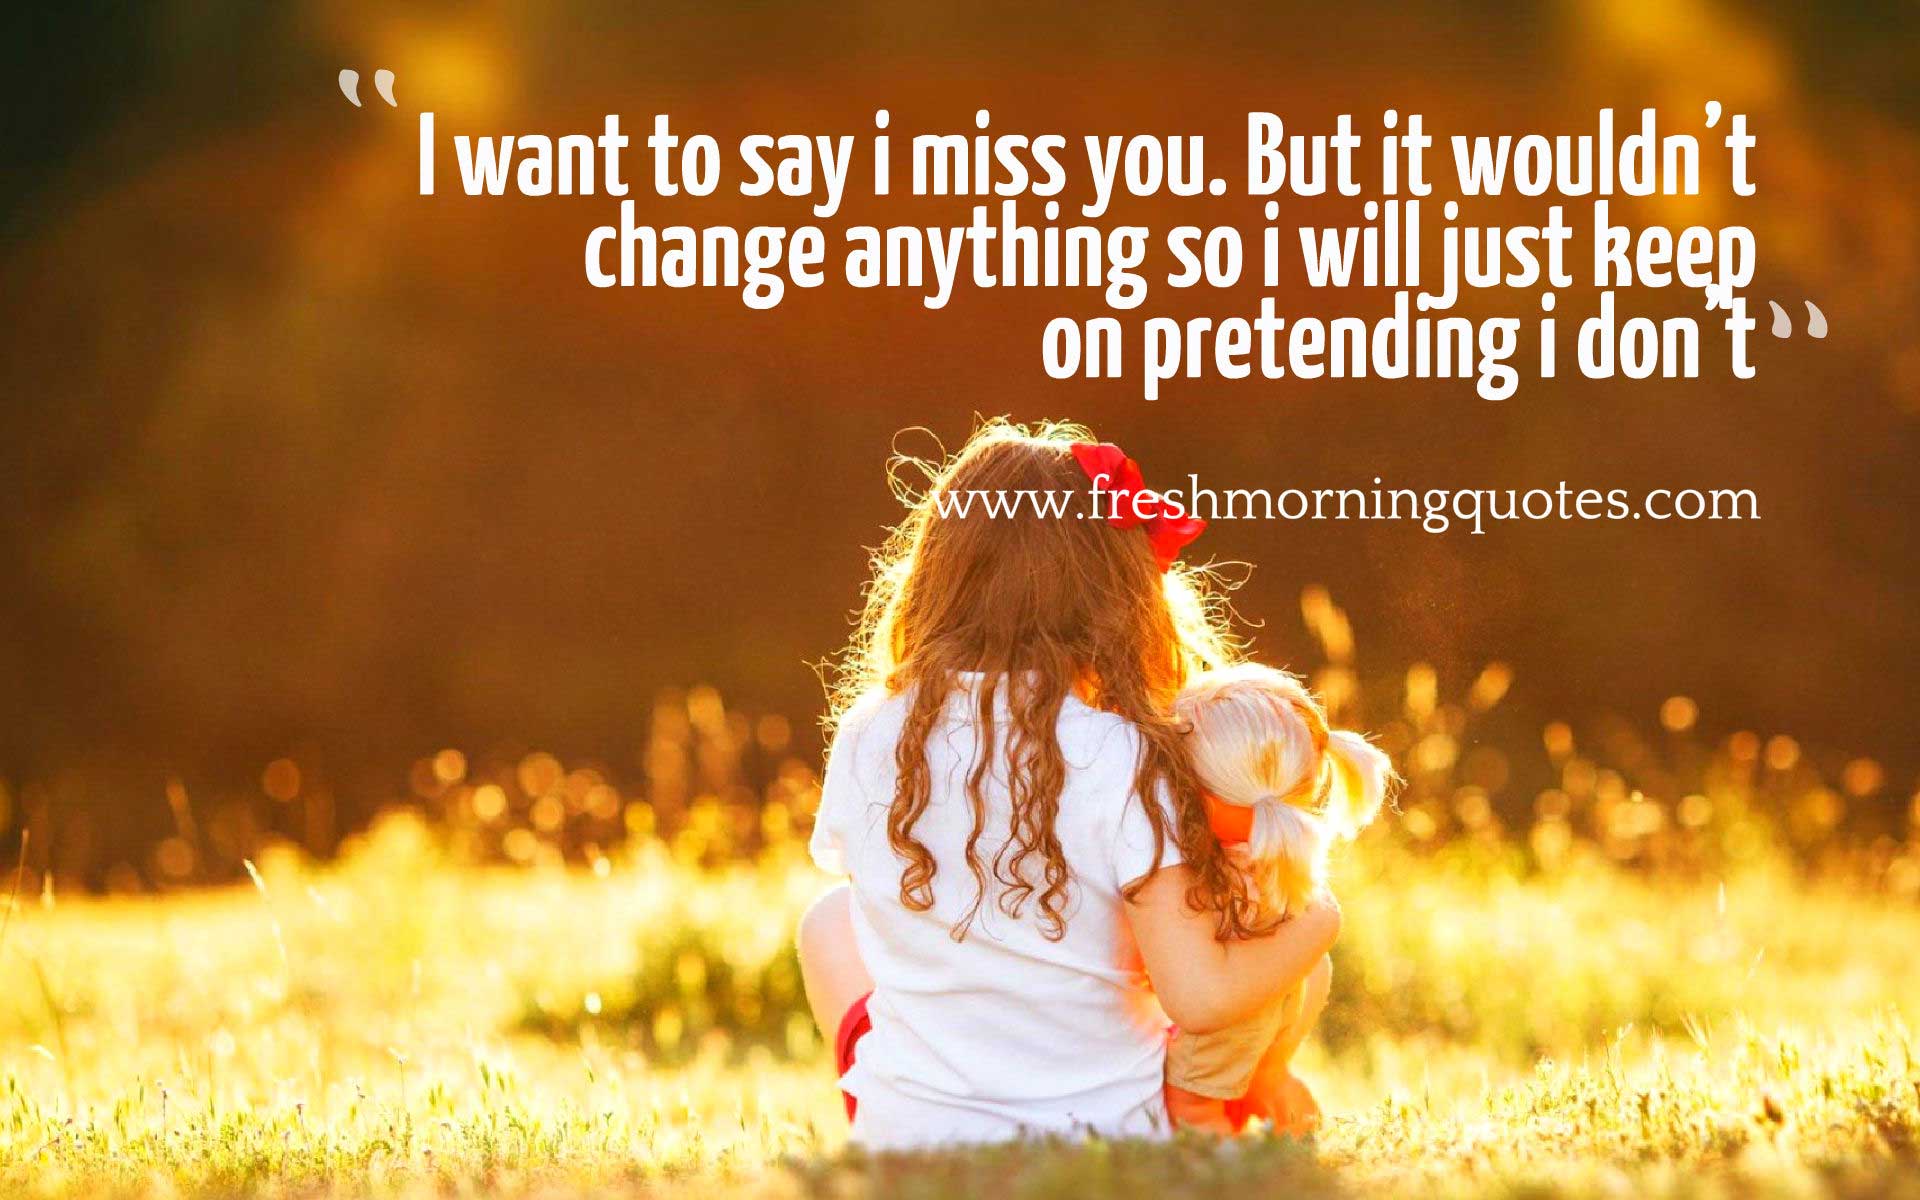 Missing You Quotes for your Love